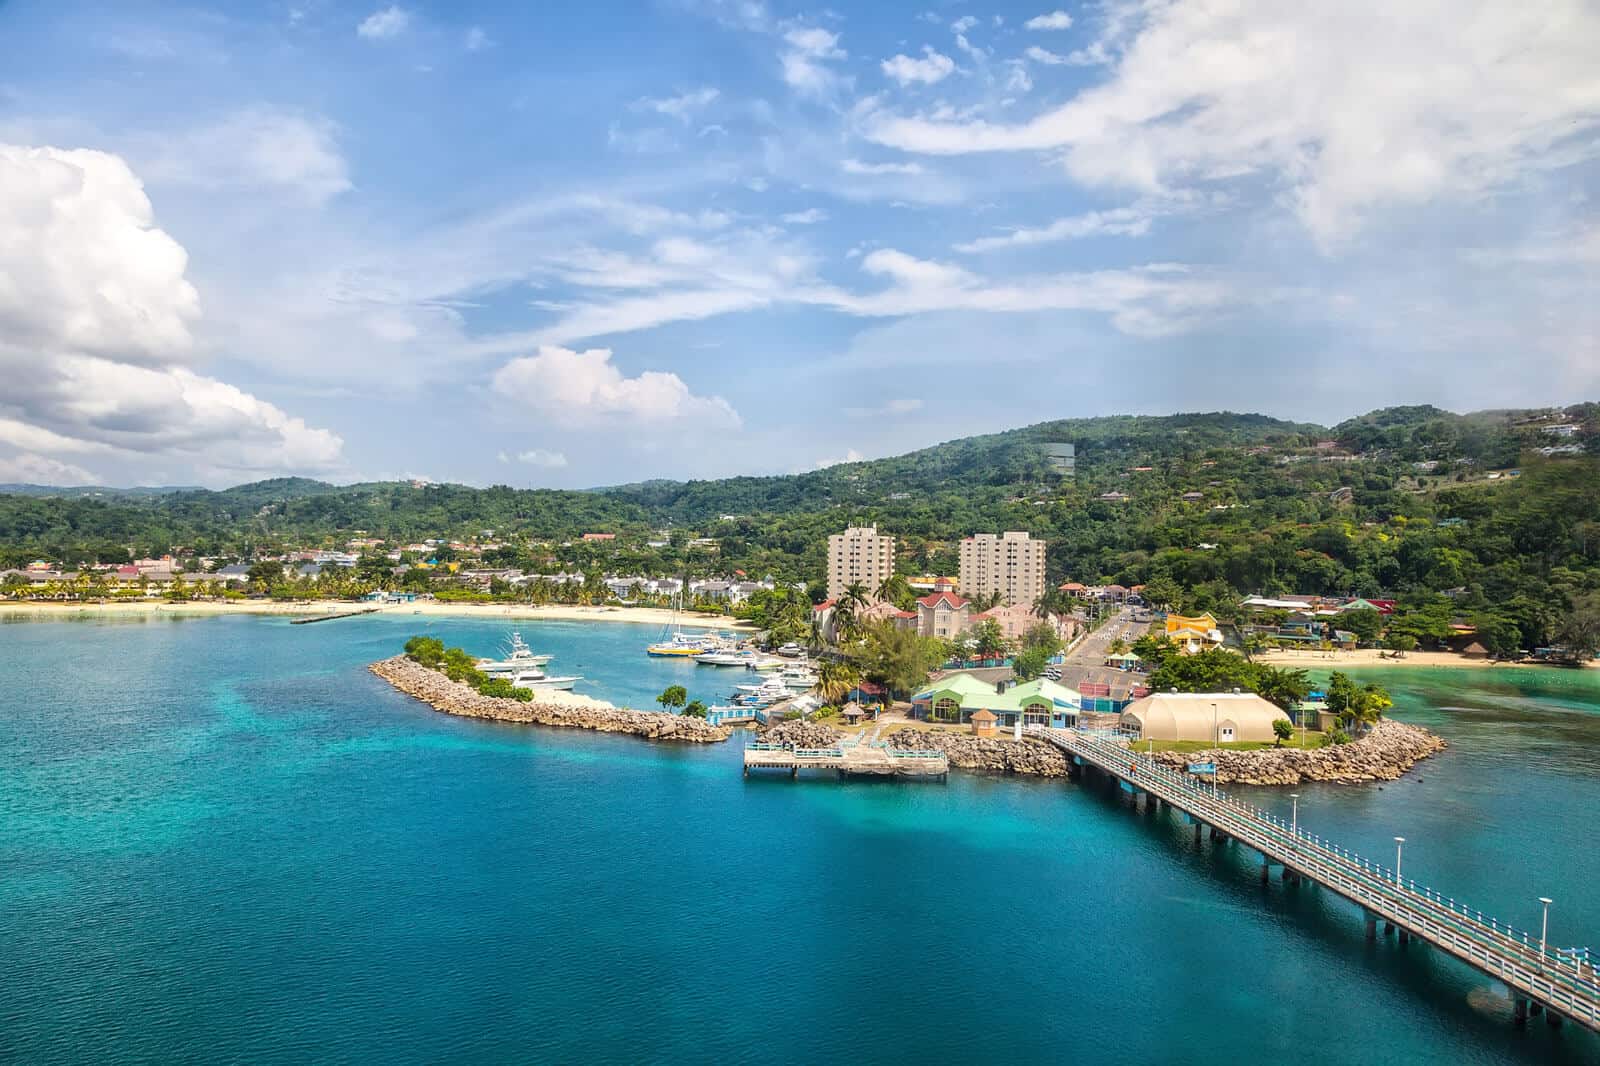 Things to Do in Jamaica: A 2-Week Itinerary